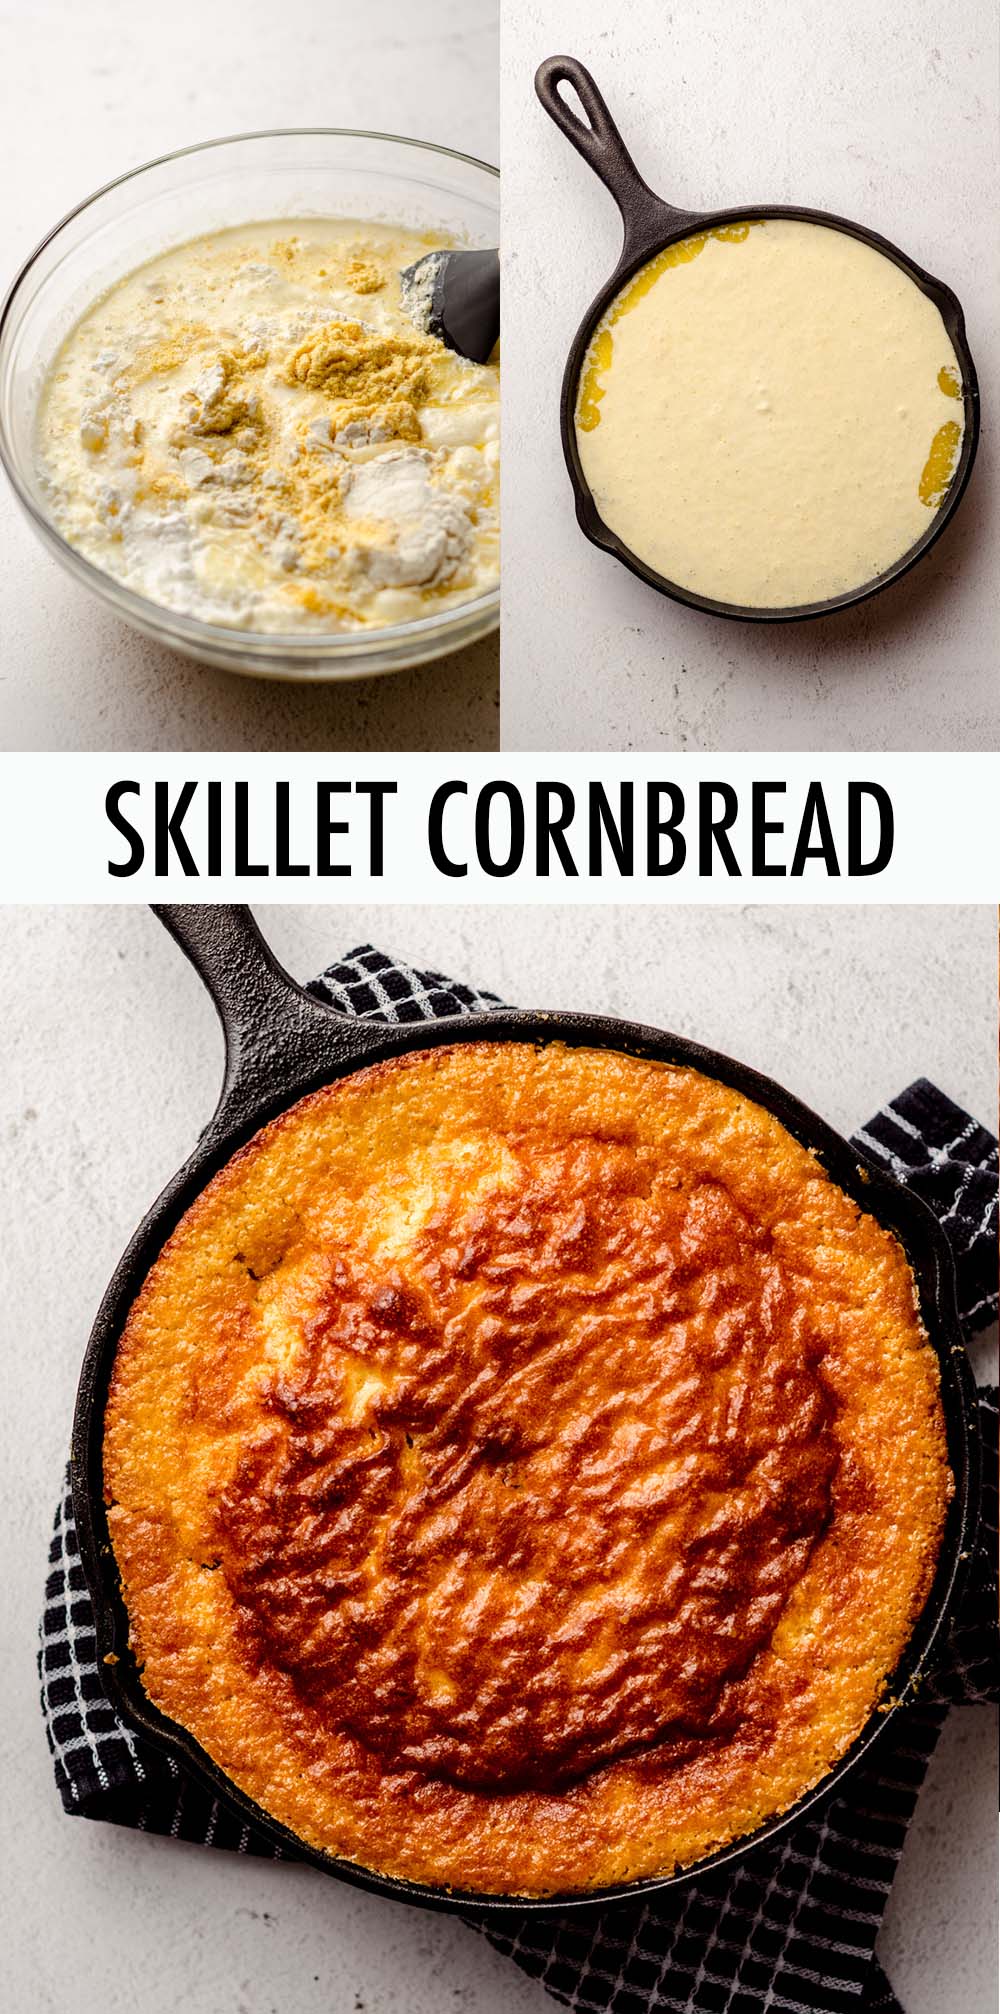 This cast iron skillet cornbread is perfect for serving up with your favorite Southern inspired meals. Crunchy and buttery on the outside, and perfectly moist on the inside. You'll never want to make it any other way ever again! via @frshaprilflours